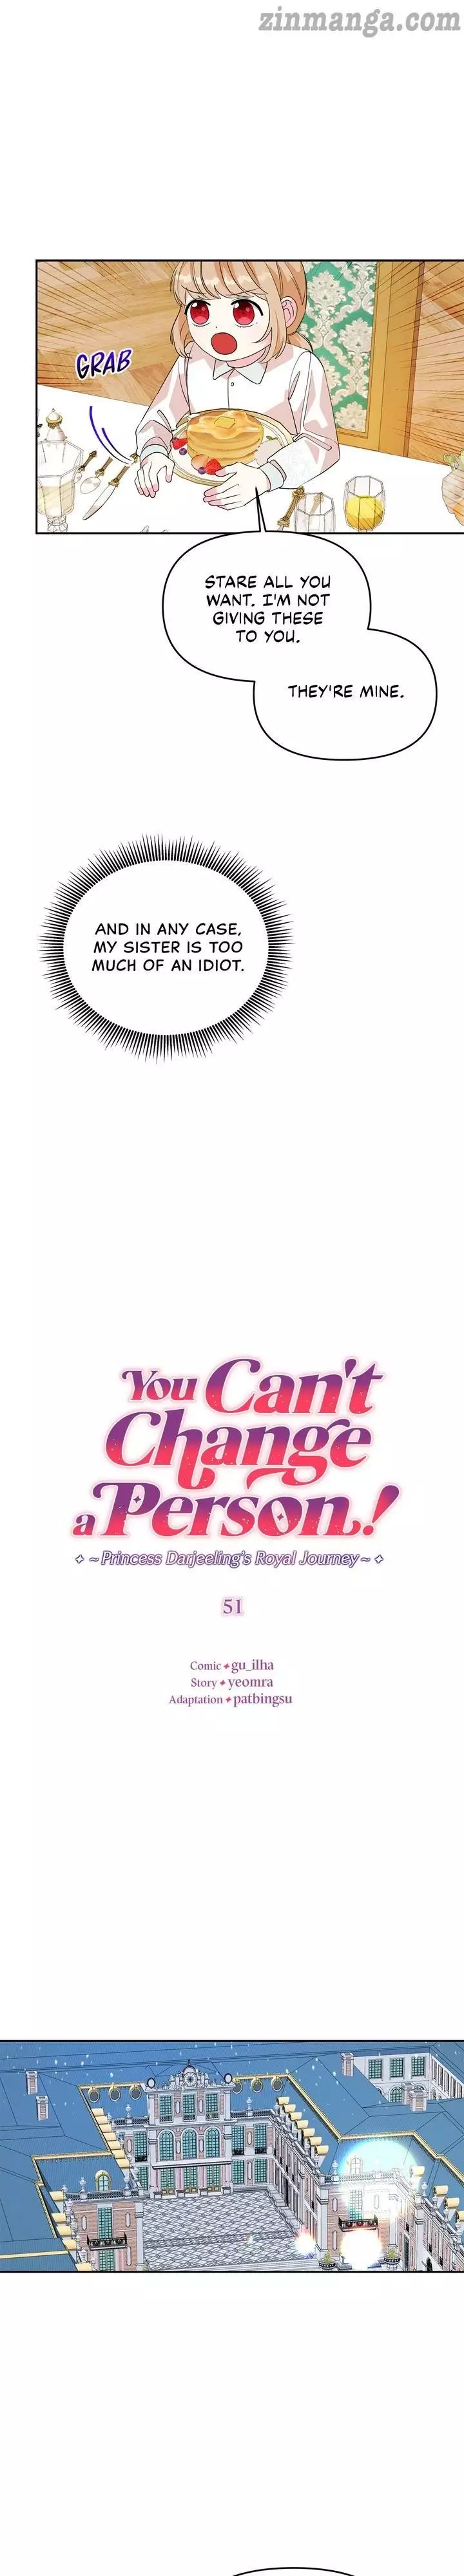 You Can’T Change A Person! - 51 page 11-67f9f6f4